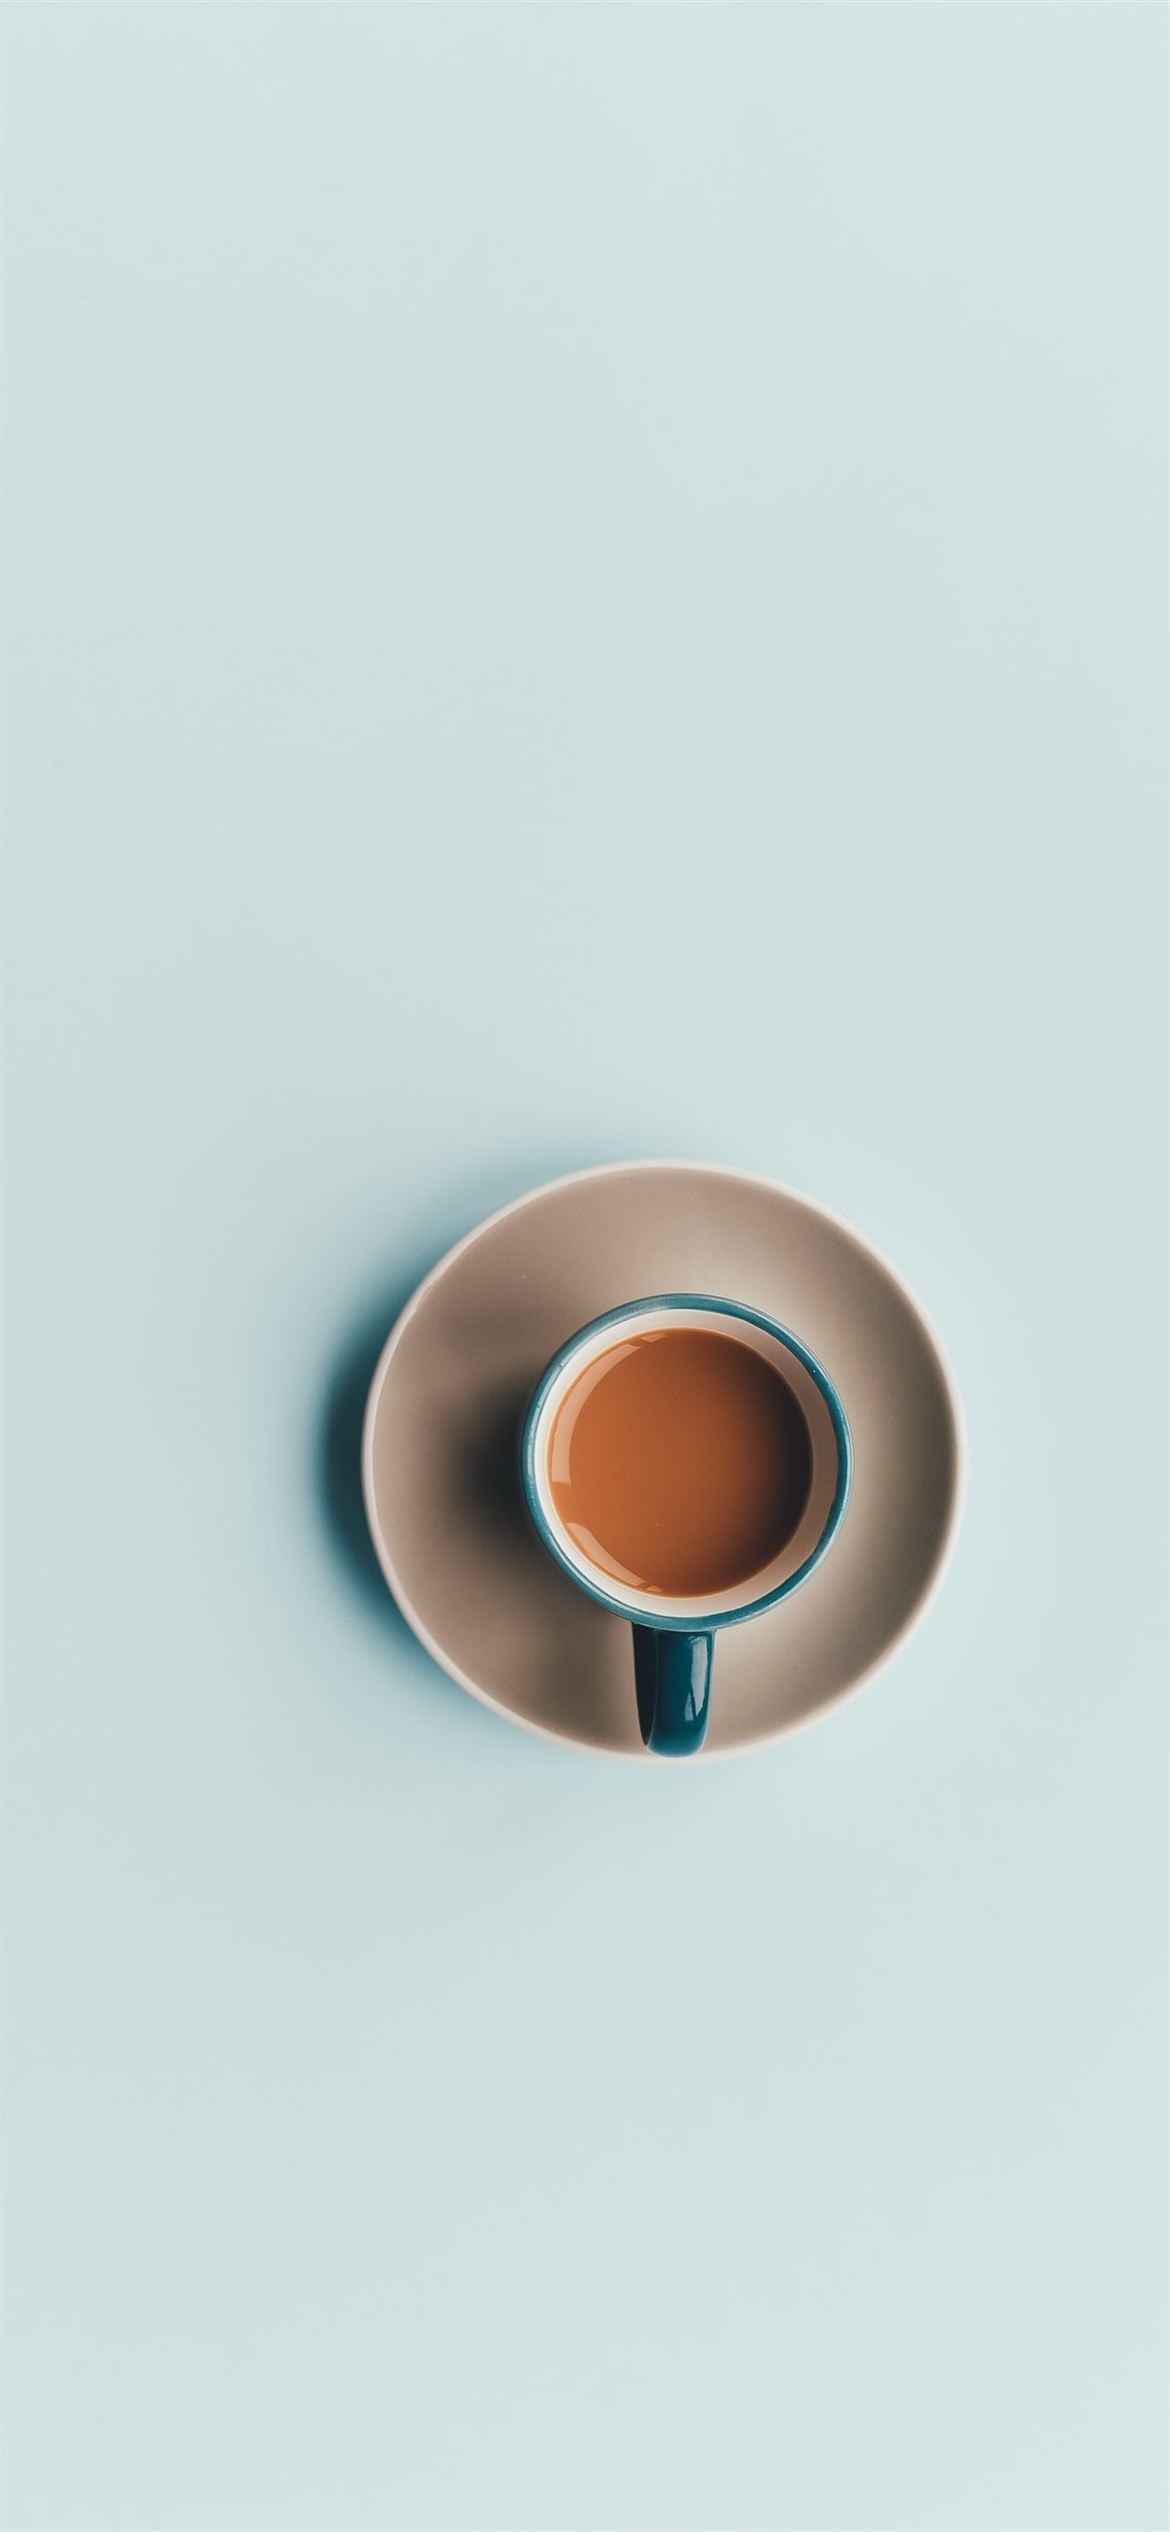 Ceramic coffee cup charm, Elegant saucer pairing, iPhone wallpaper scene, Blue and white delight, 1170x2540 HD Phone